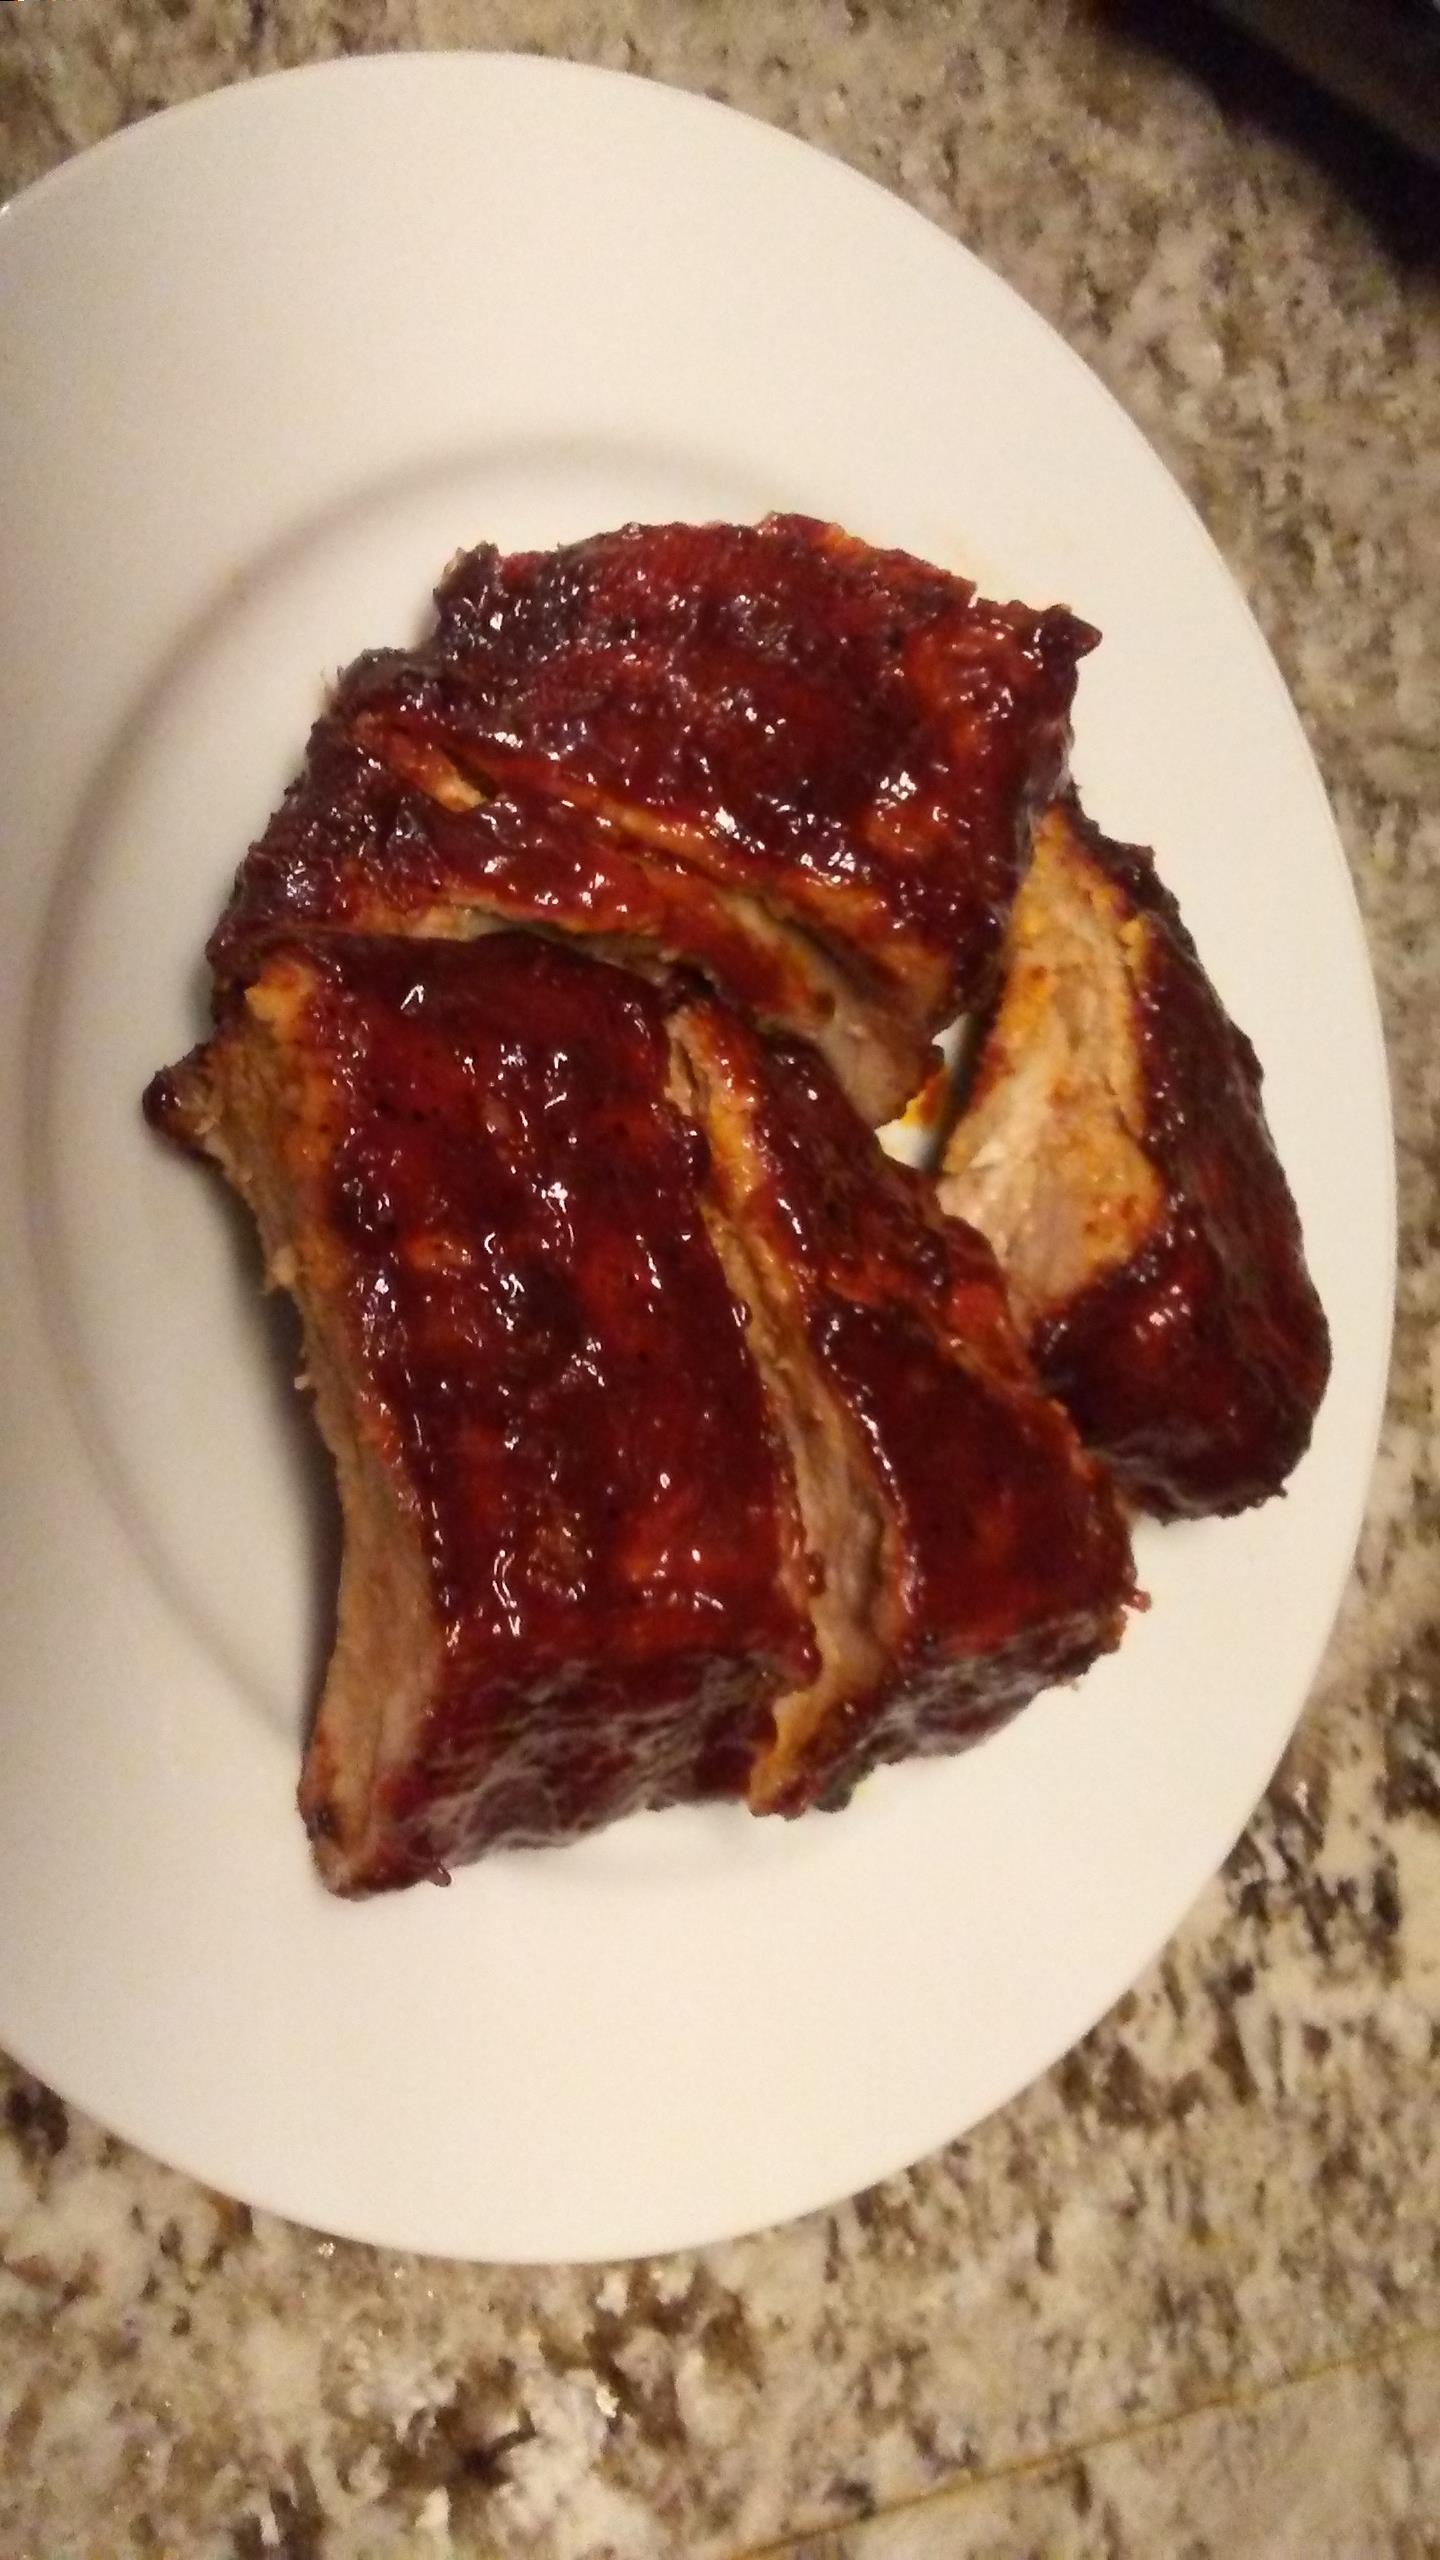 Baked Bbq Baby Back Ribs Allrecipes,Queen Size Comforter Dimensions In Inches